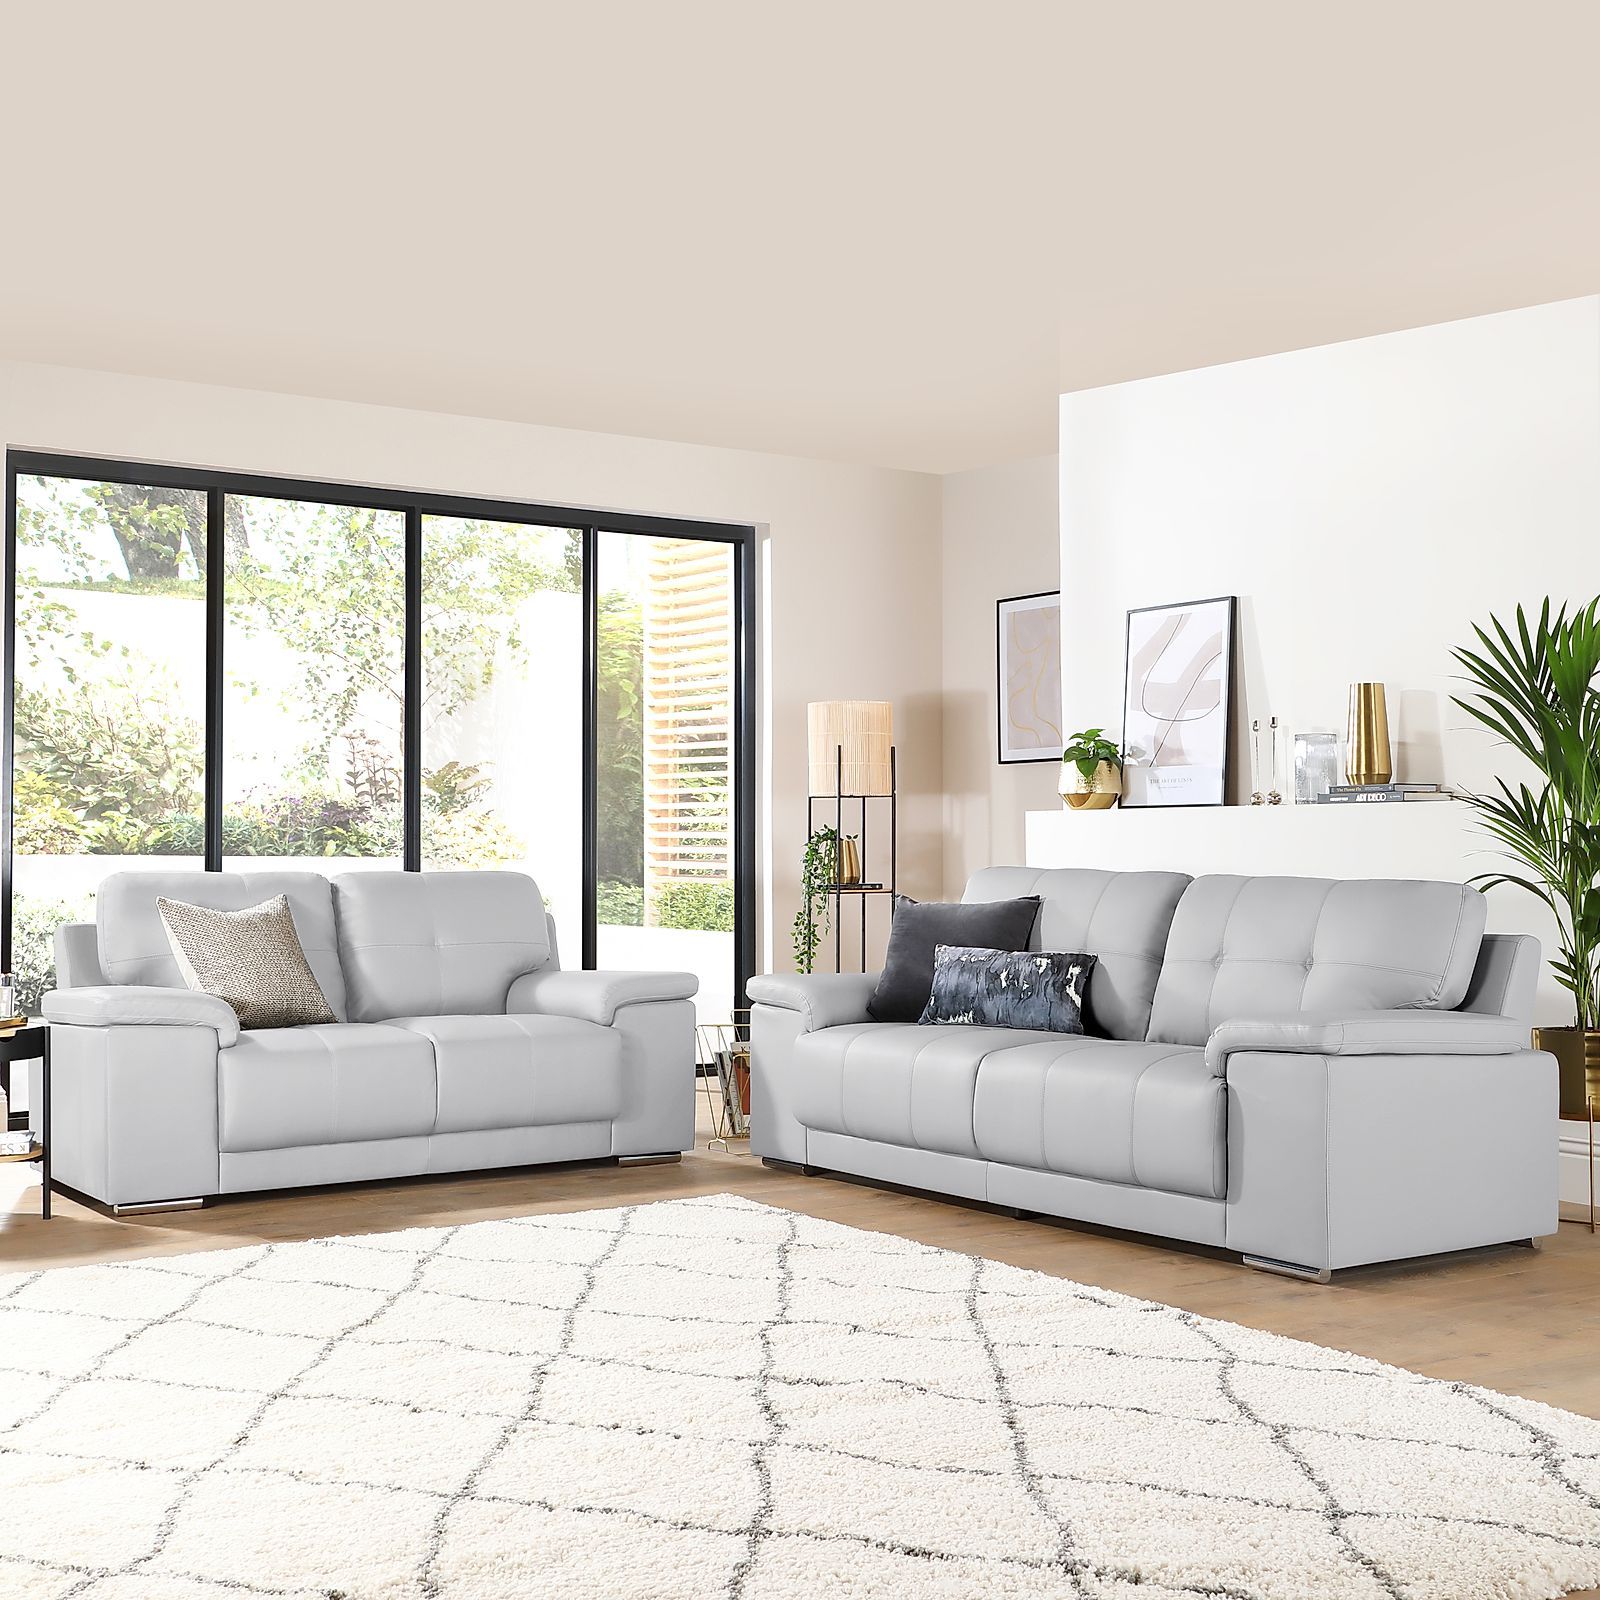 Kansas Light Grey Leather 3+2 Seater Sofa Set | Furniture Choice With Sofas In Light Grey (Gallery 7 of 20)